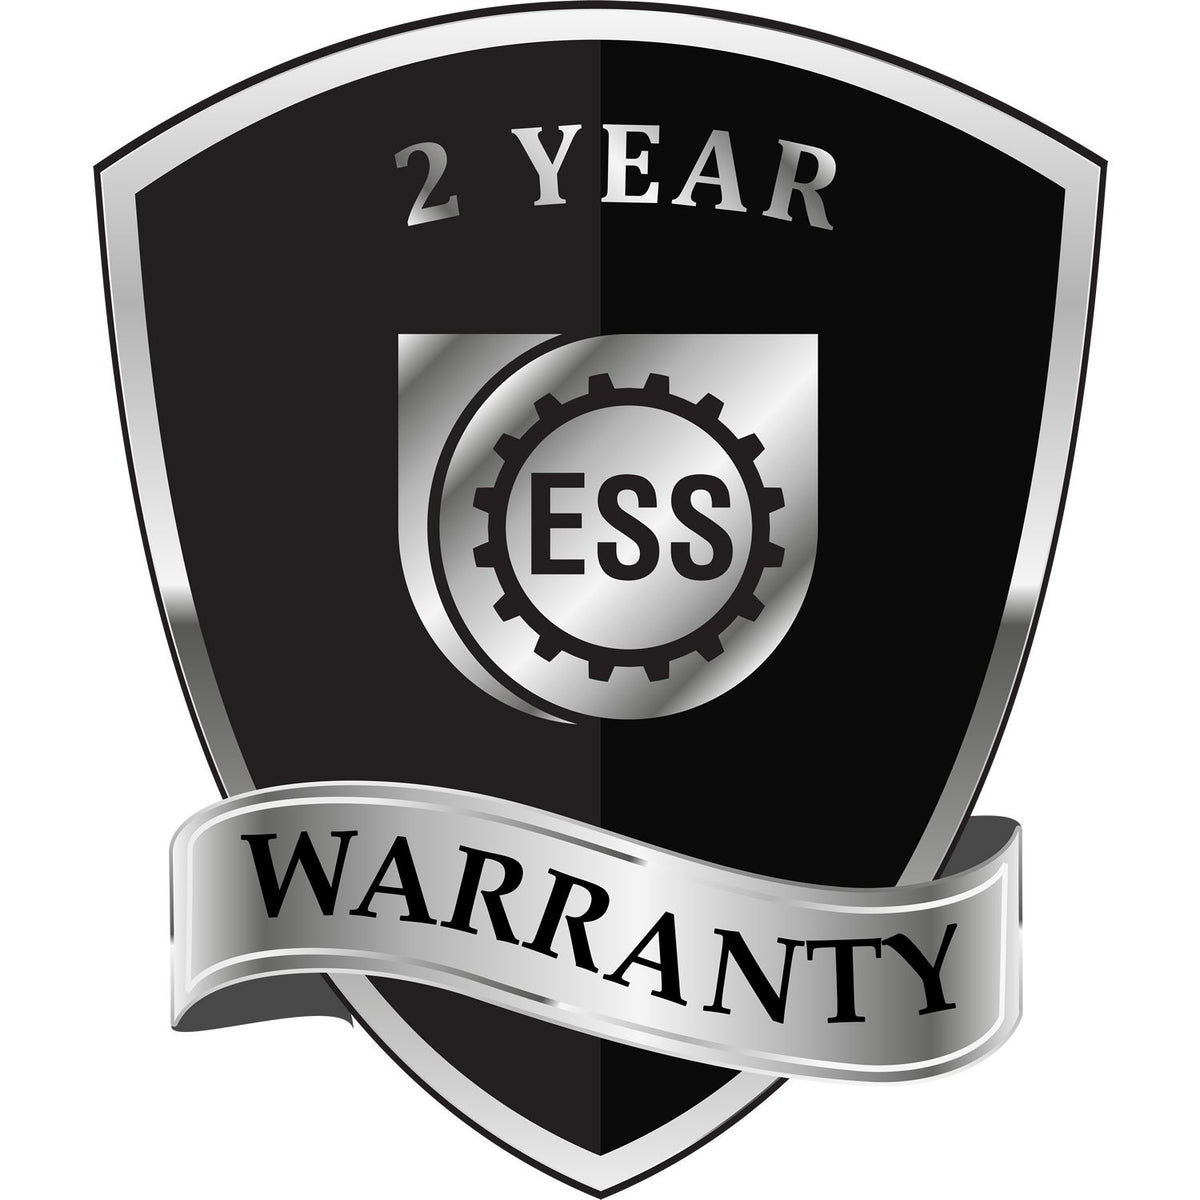 A black and silver badge or emblem showing warranty information for the State of North Dakota Extended Long Reach Geologist Seal